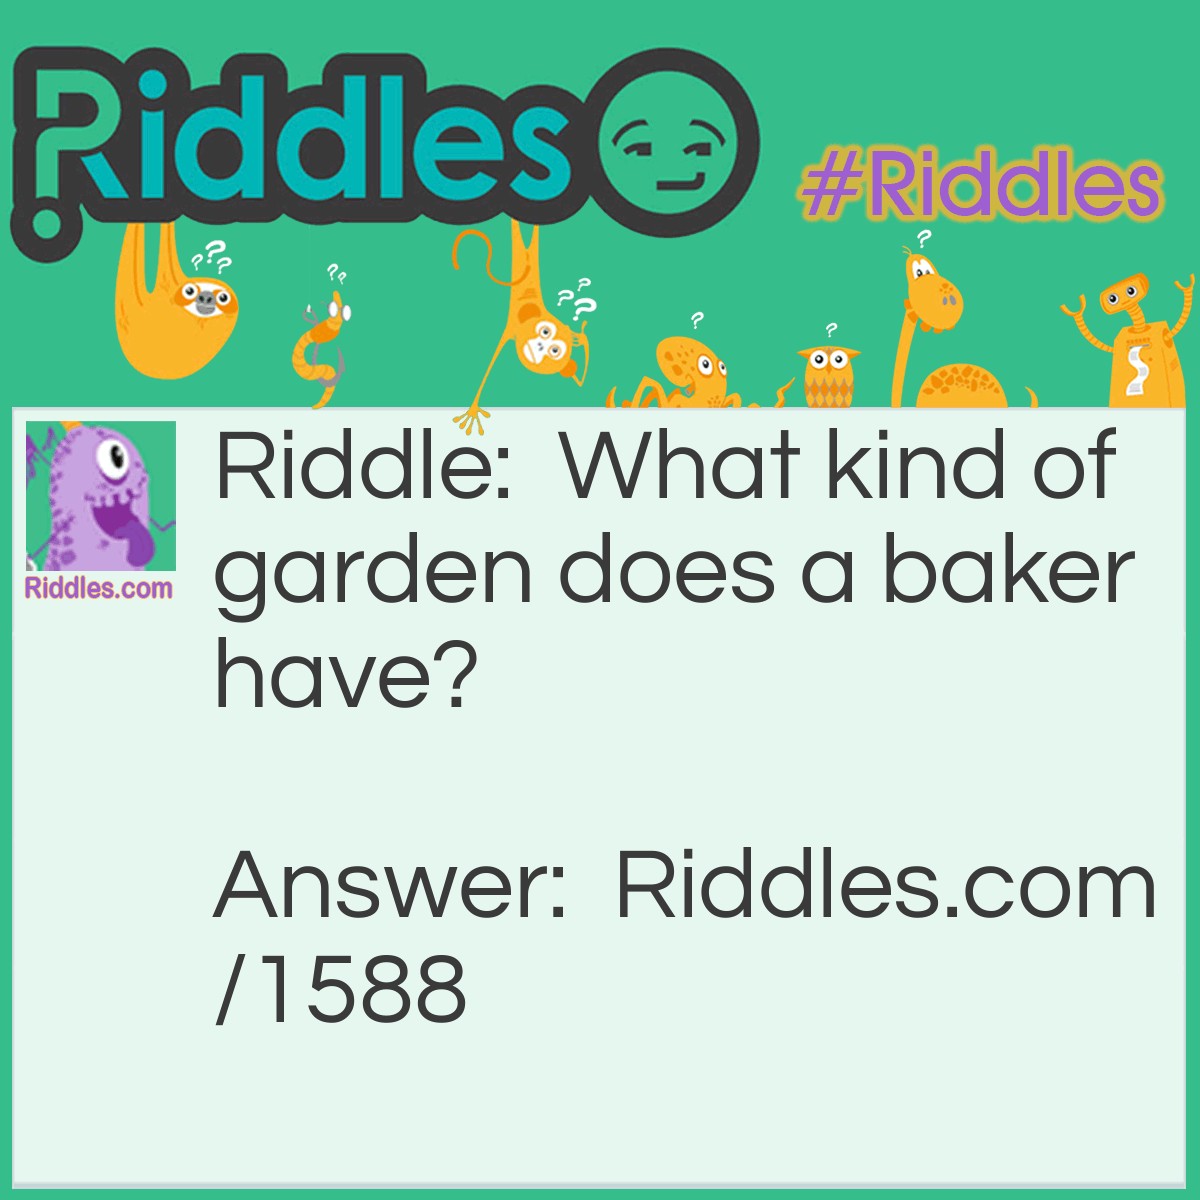 Riddle: What kind of garden does a baker have? Answer: A flour garden!